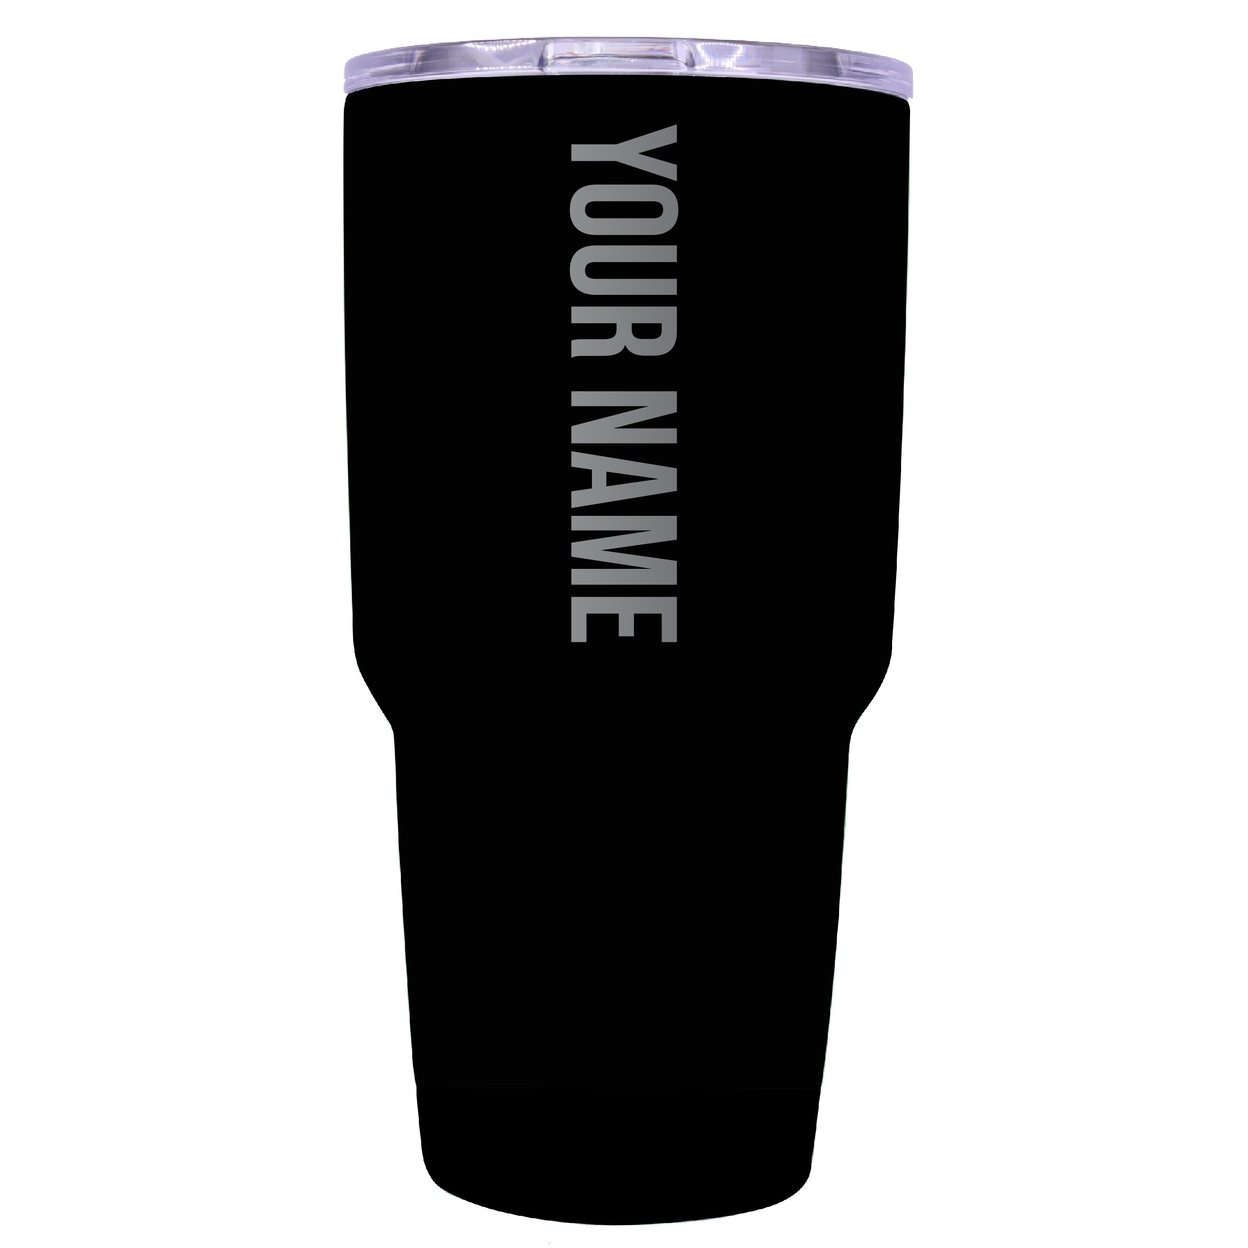 Customizable Laser Etched 24 Oz Insulated Stainless Steel Tumbler Personalized With Custom Name Or Message - Navy, Single